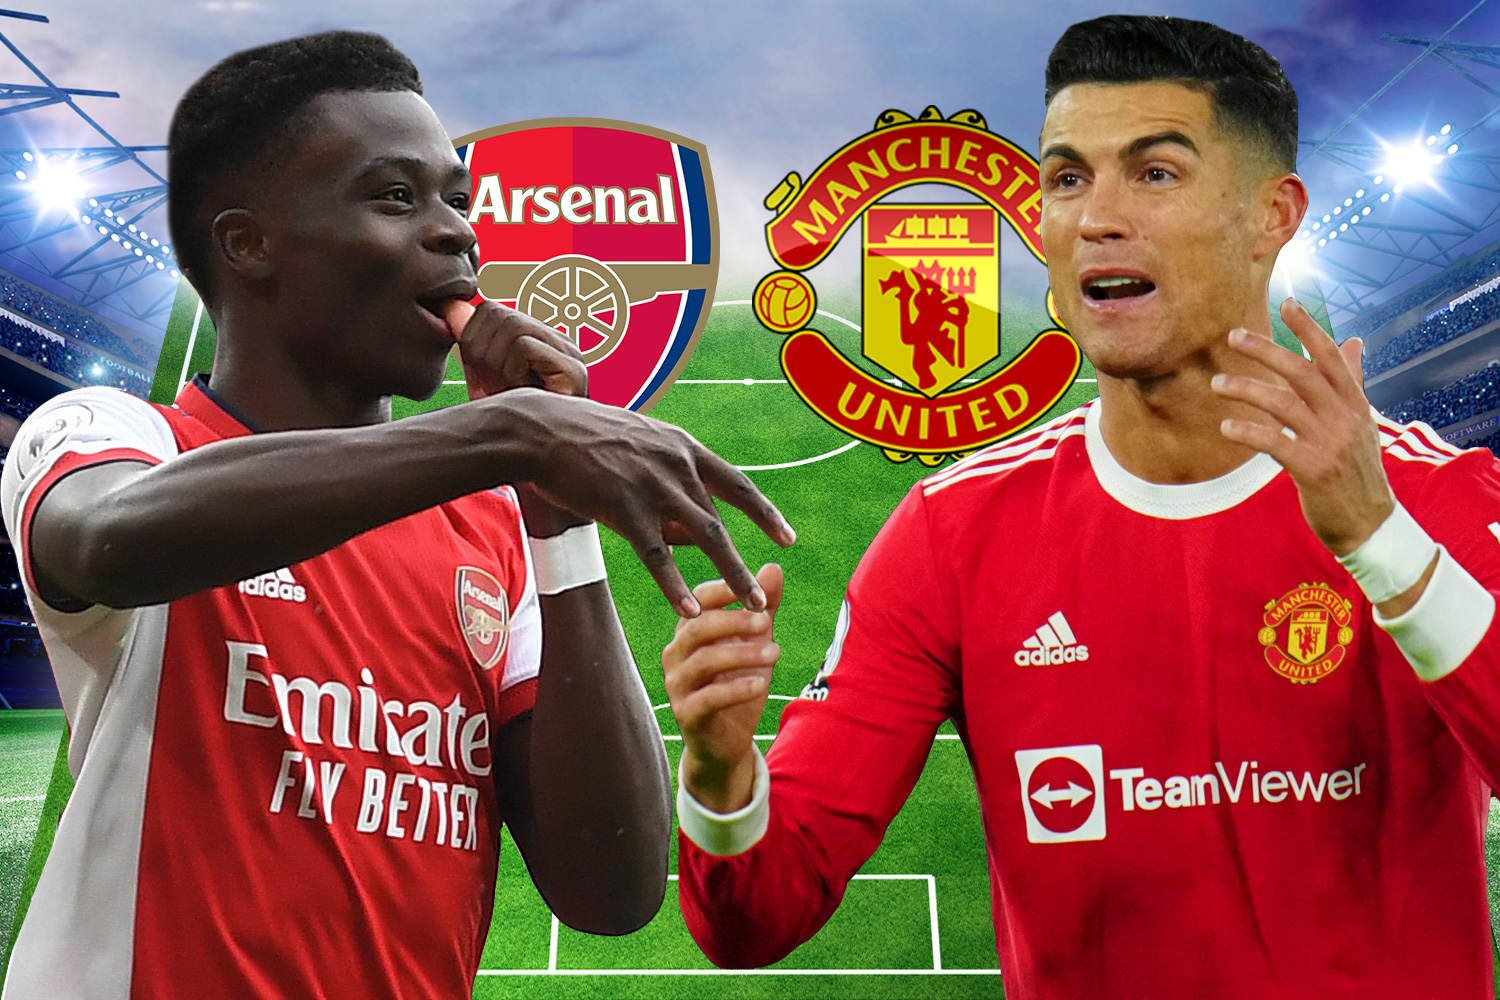 Man Utd & Arsenal combined XI with Gunners DOMINATING ahead of crunch game